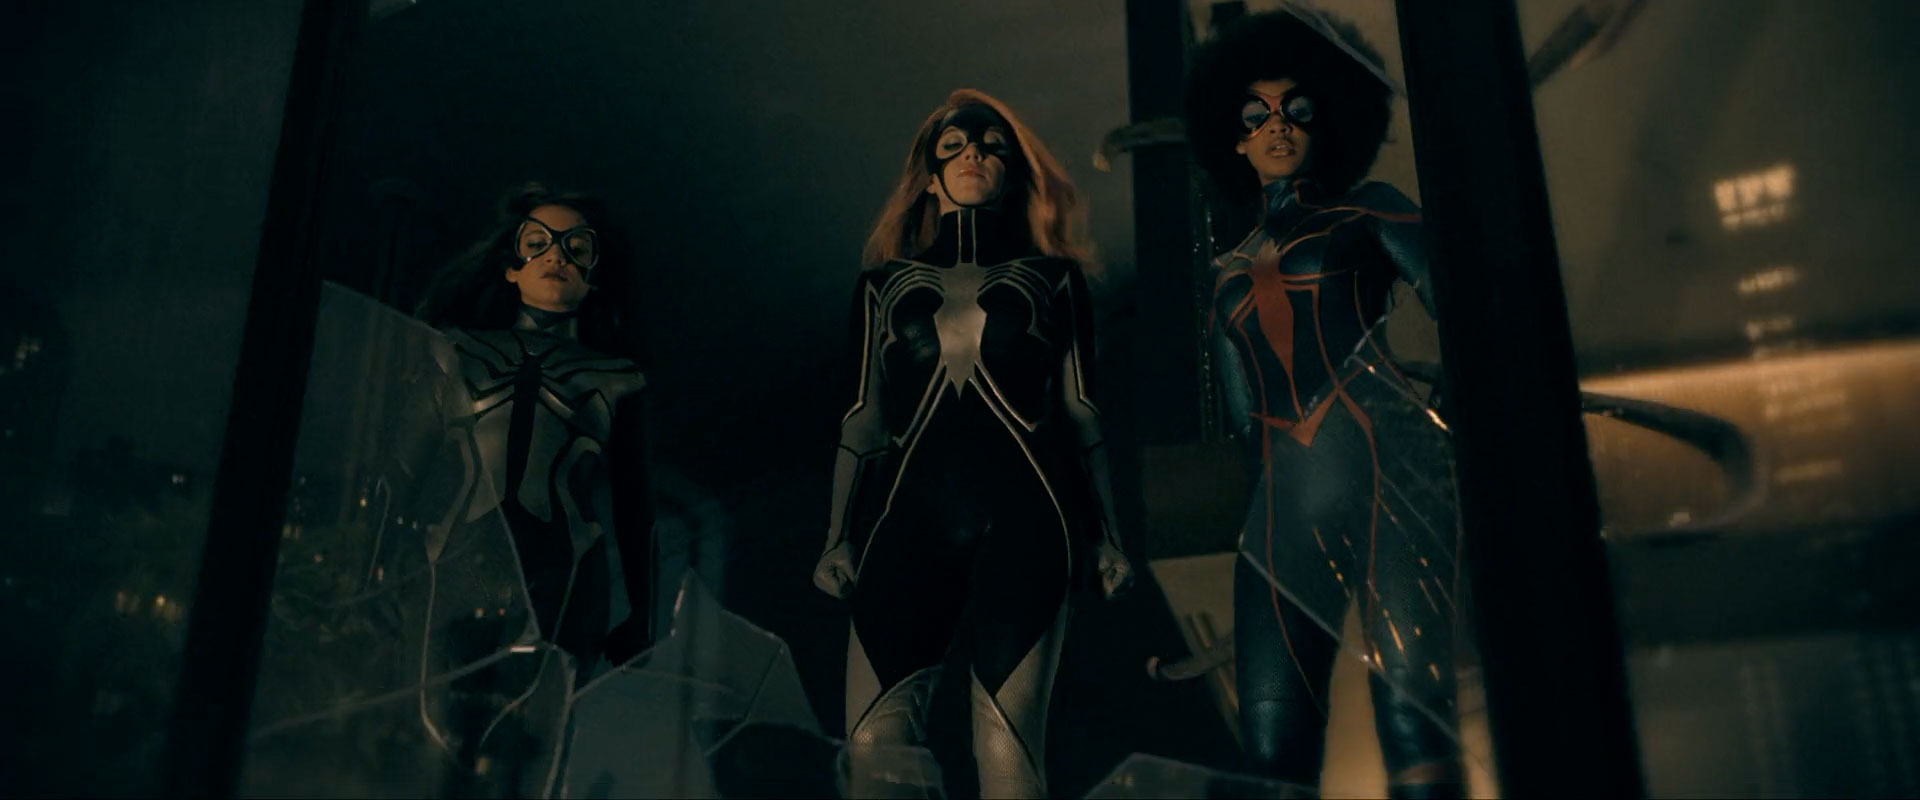 The Spider-women in Madame Web